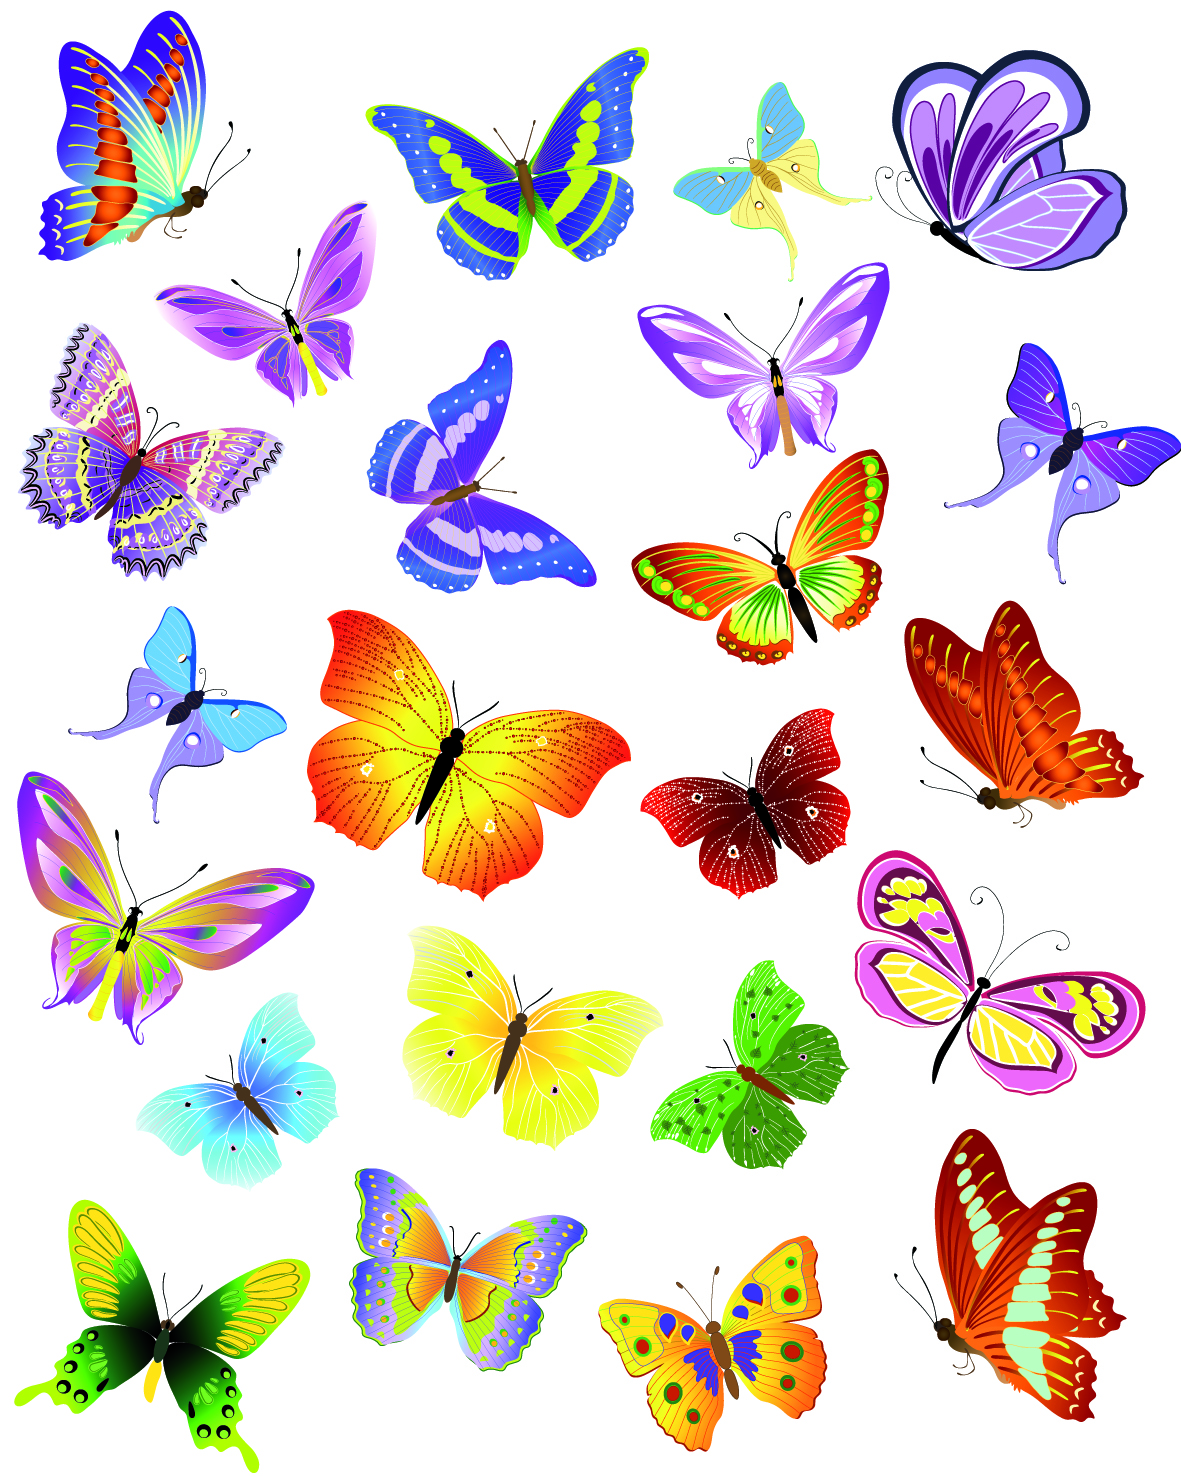 free vector clipart butterfly - photo #29